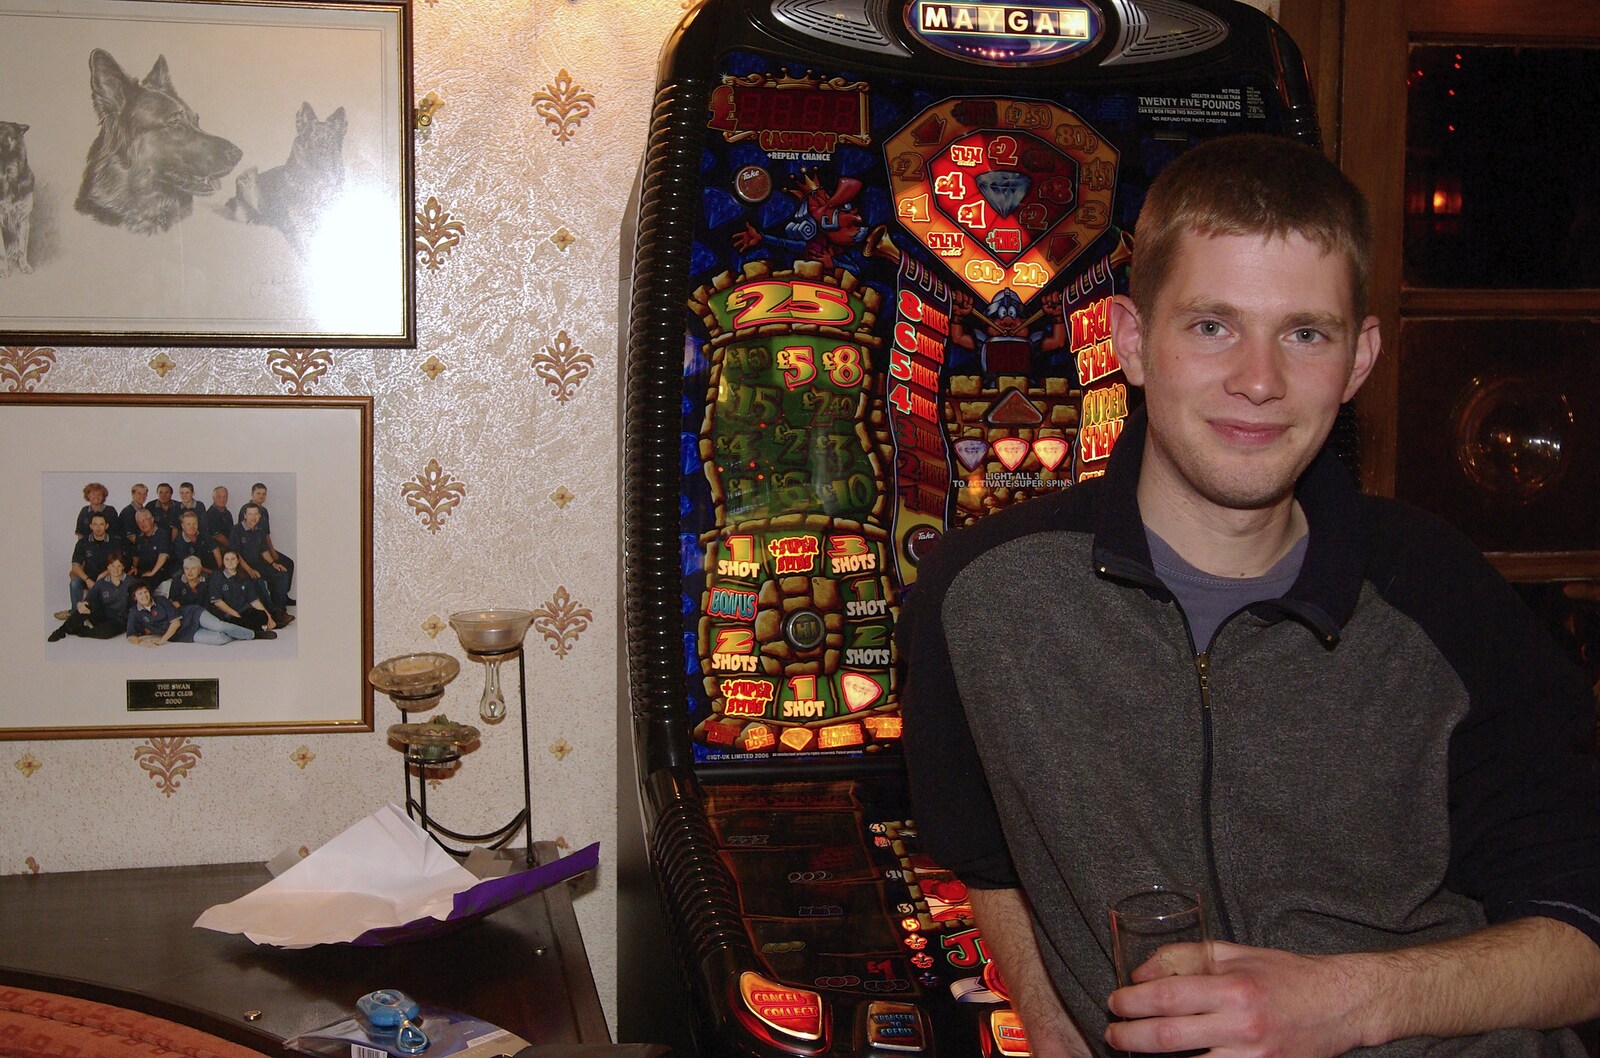 The Boy Phil leans on the fruit machine from The Boy Phil Leaves, Swan Inn, Brome, Suffolk - 4th November 2007